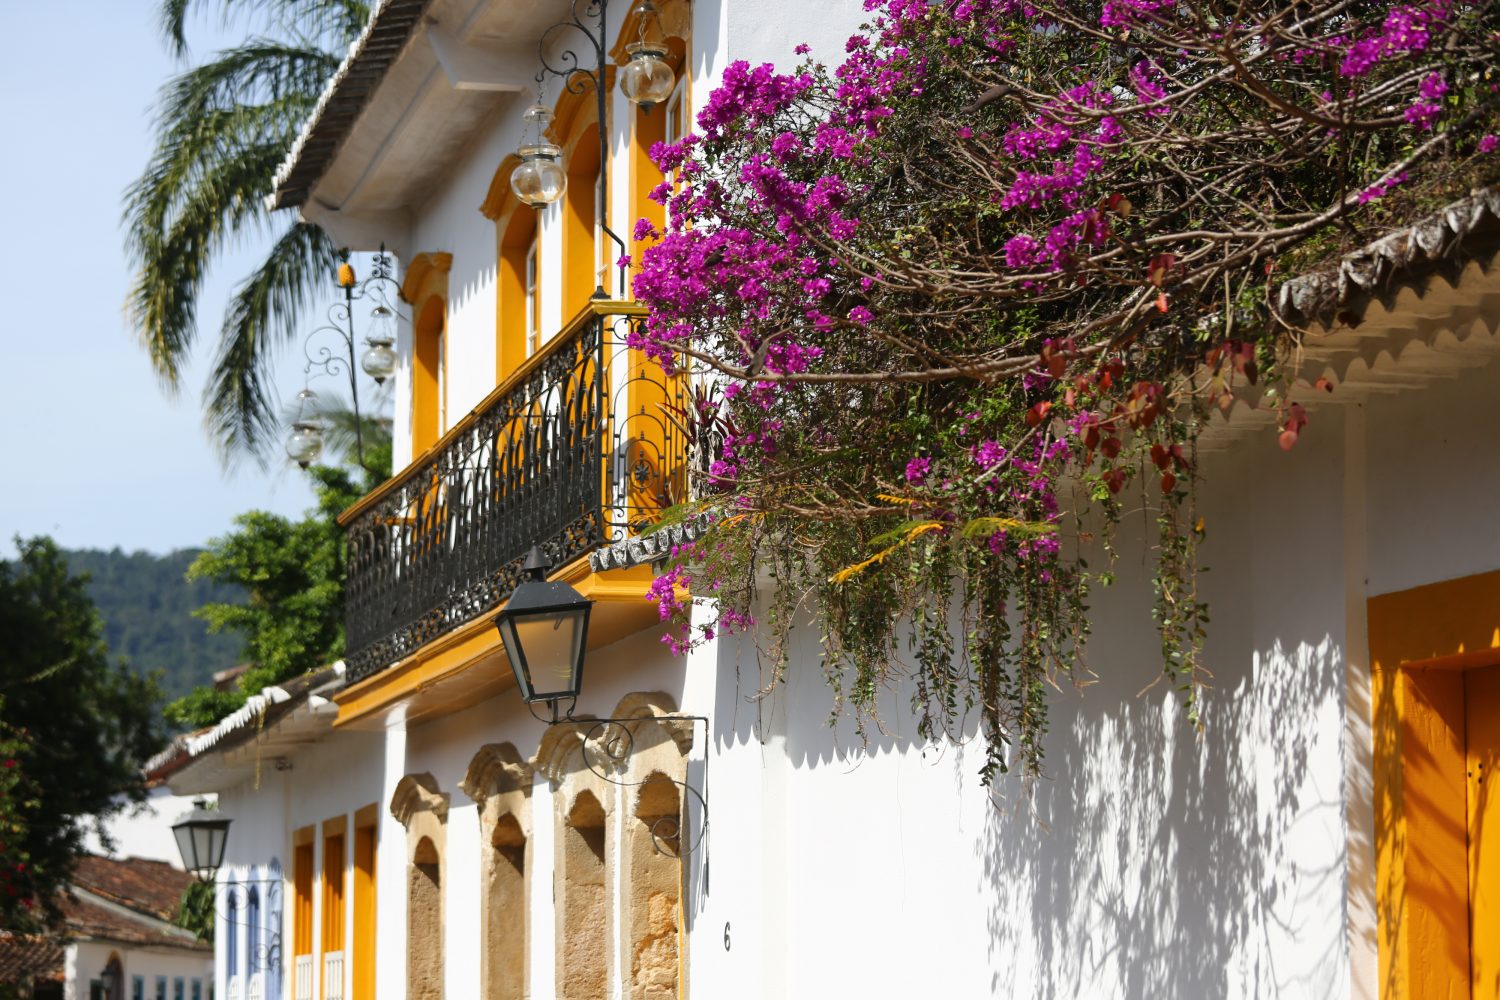 Flowers falling out over the houses in Paraty. 